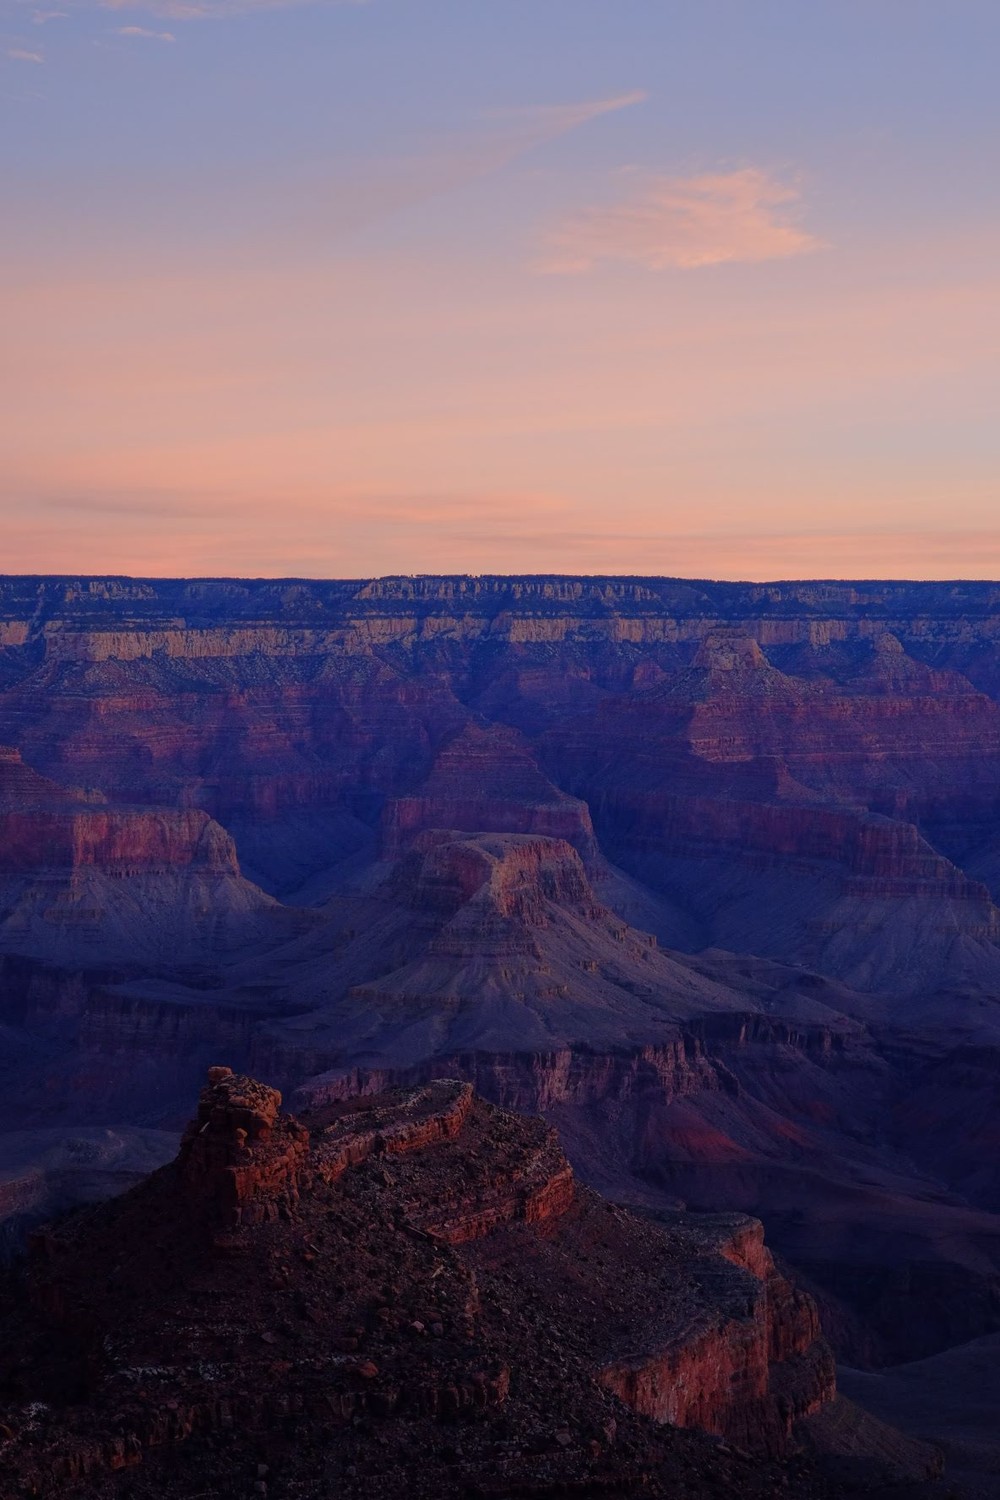 The Grand Canyon at sunrise